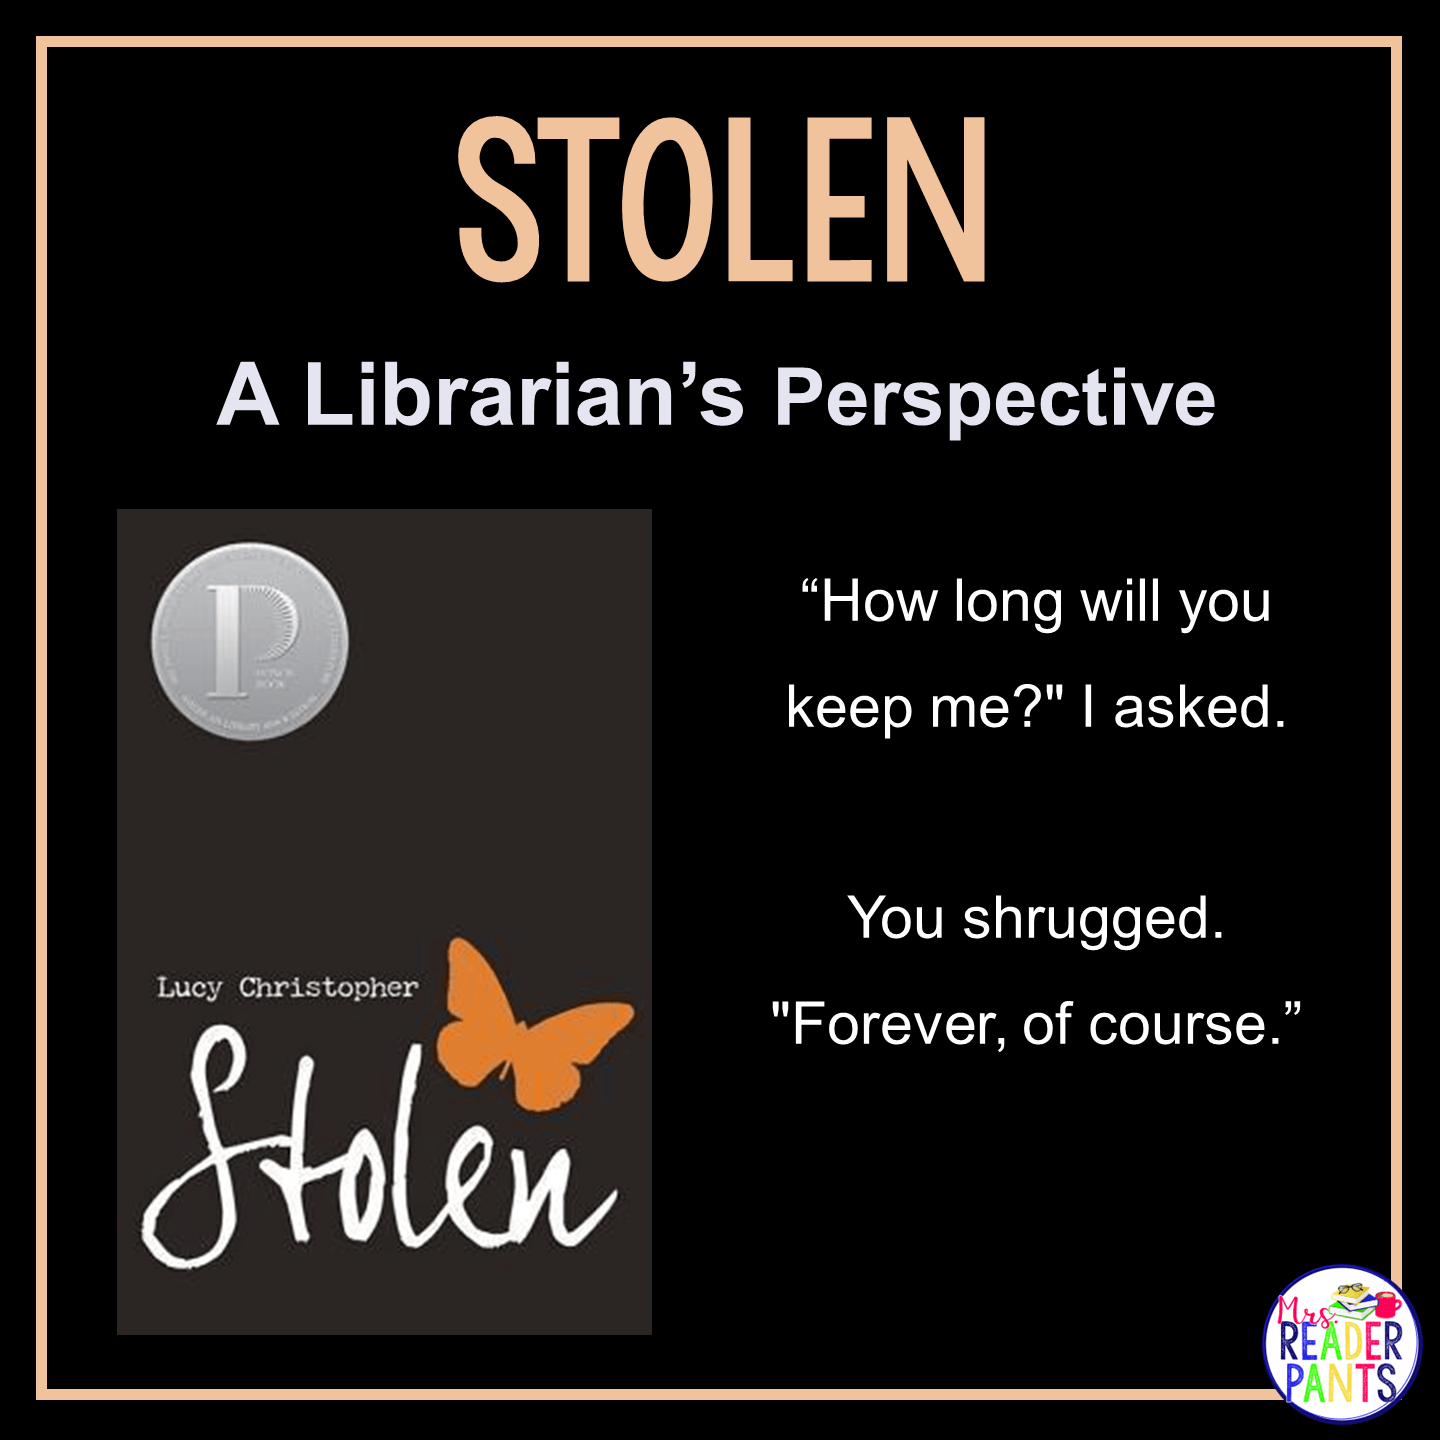 This is a librarian's perspective review of Stolen by Lucy Christopher. Image contains front cover and a quotation from the book.